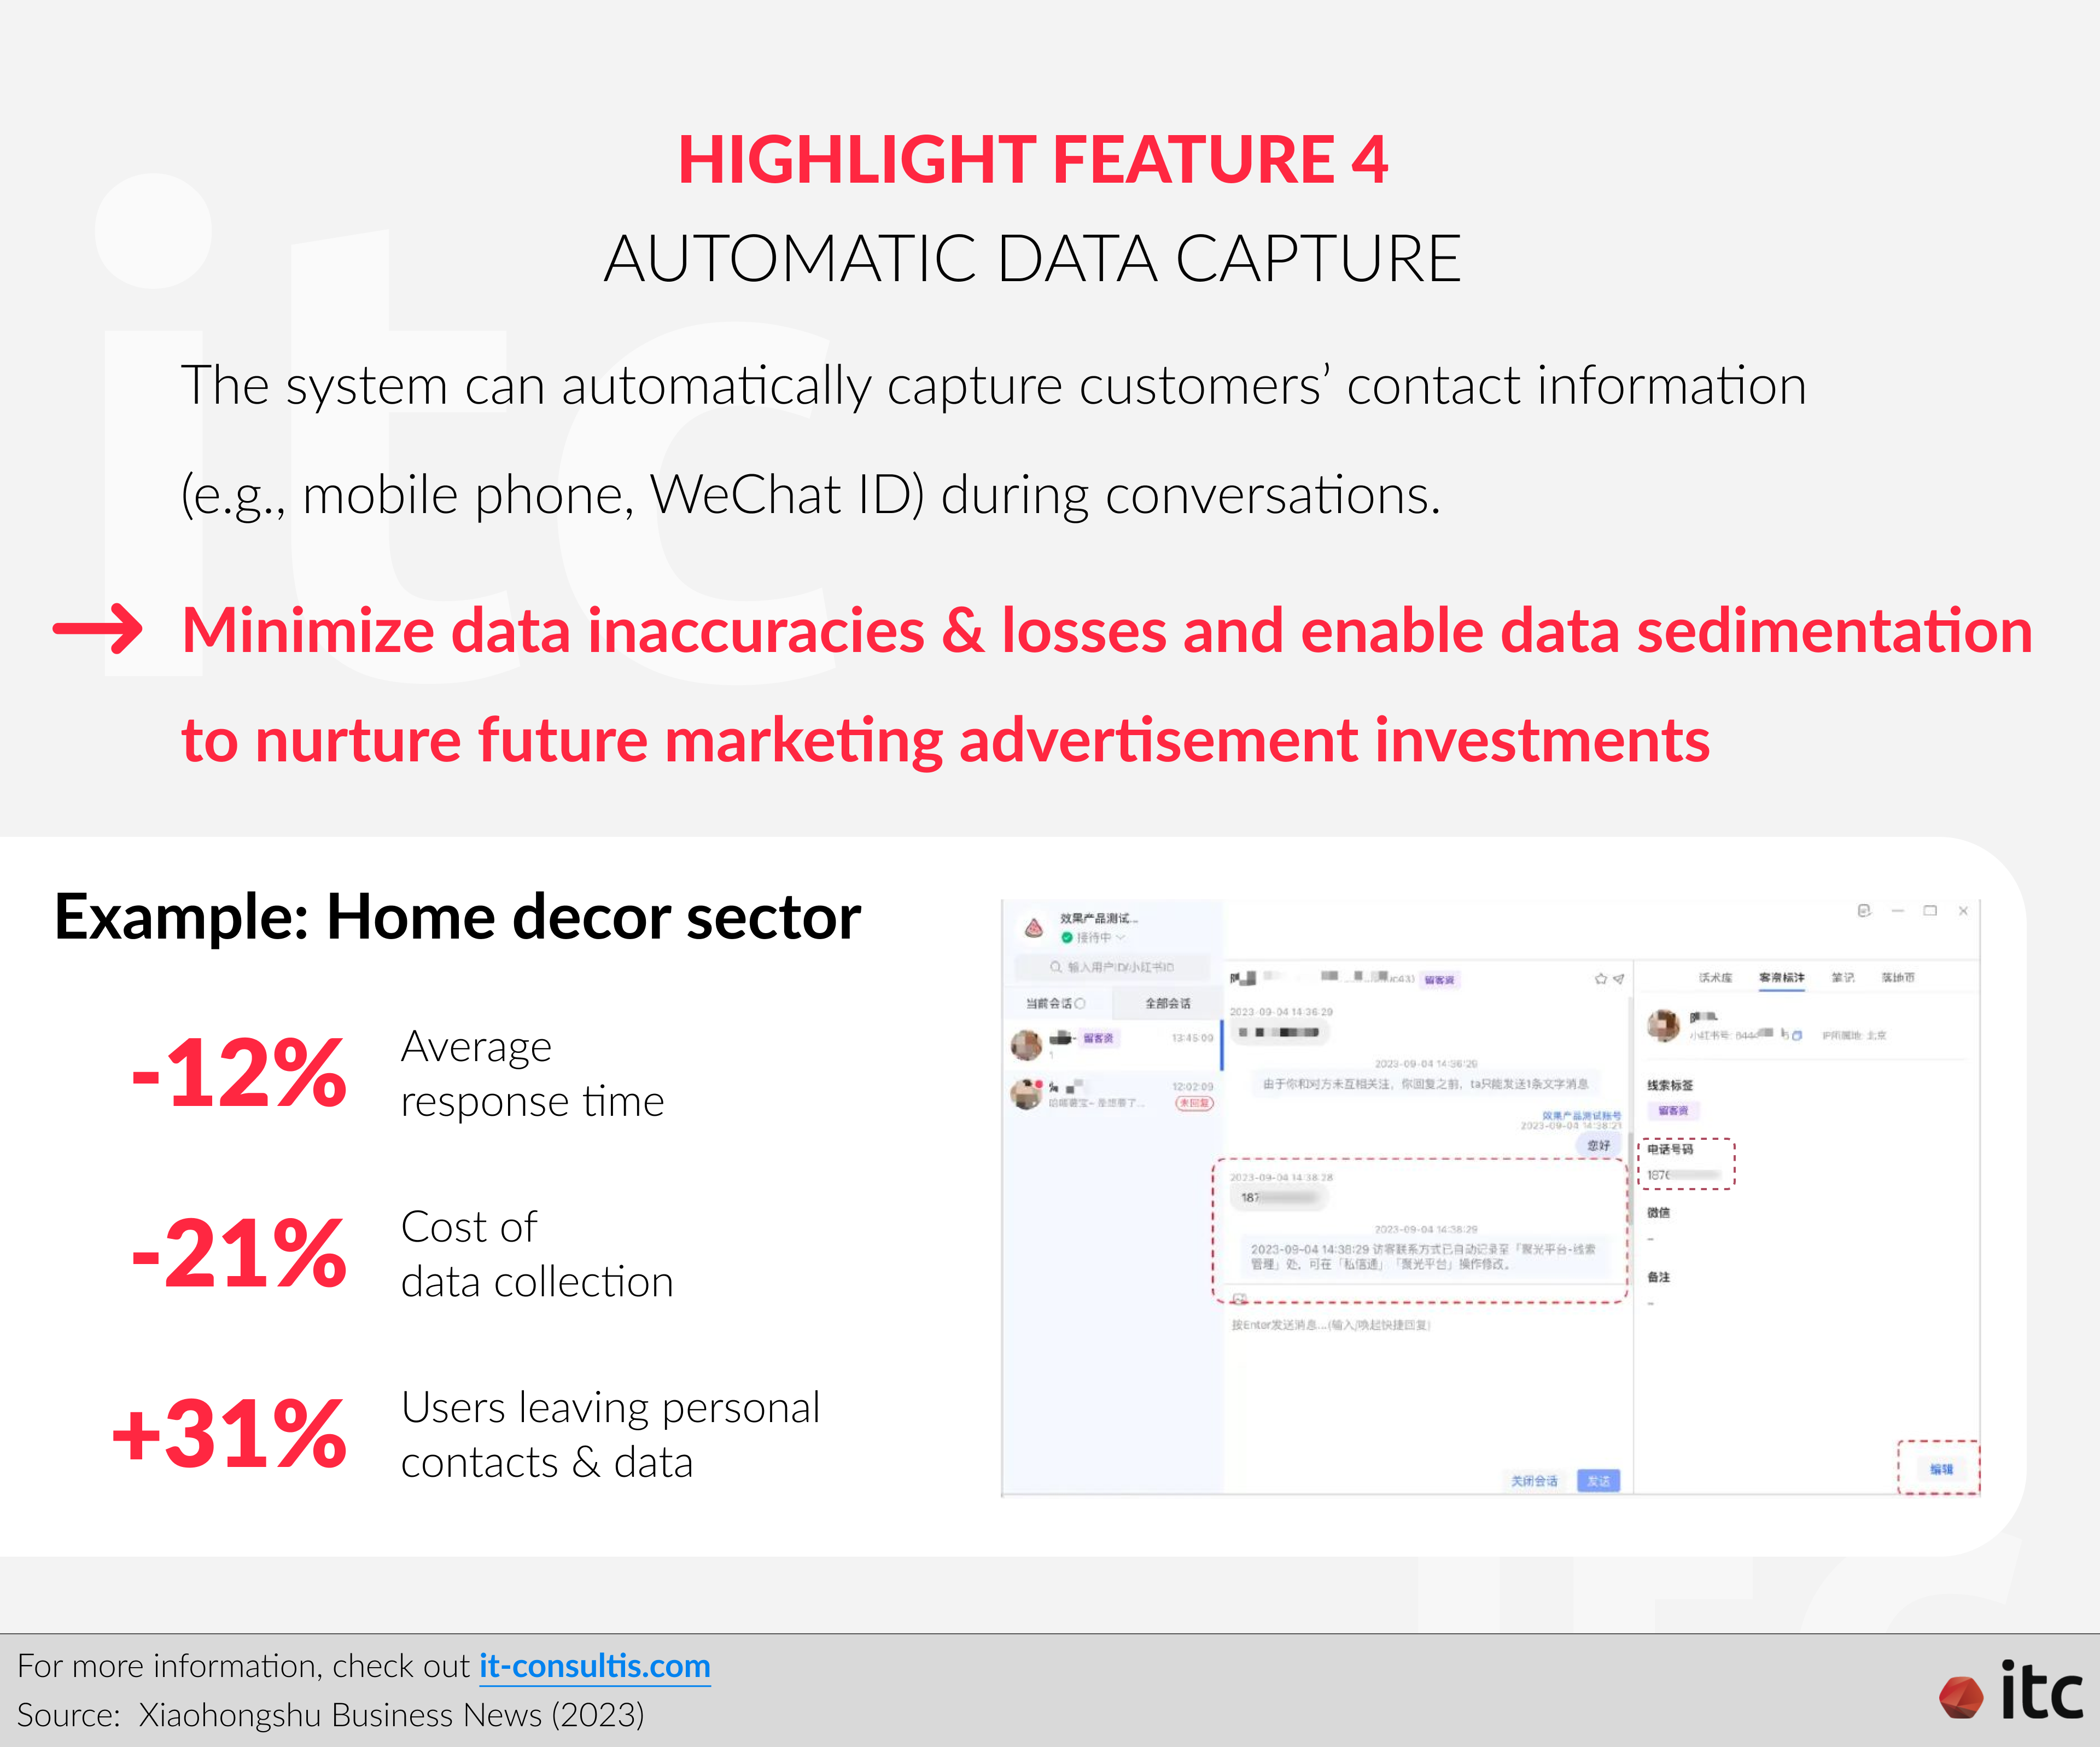 Xiaohongshu private message highlight feature 4: Automatic Data capture